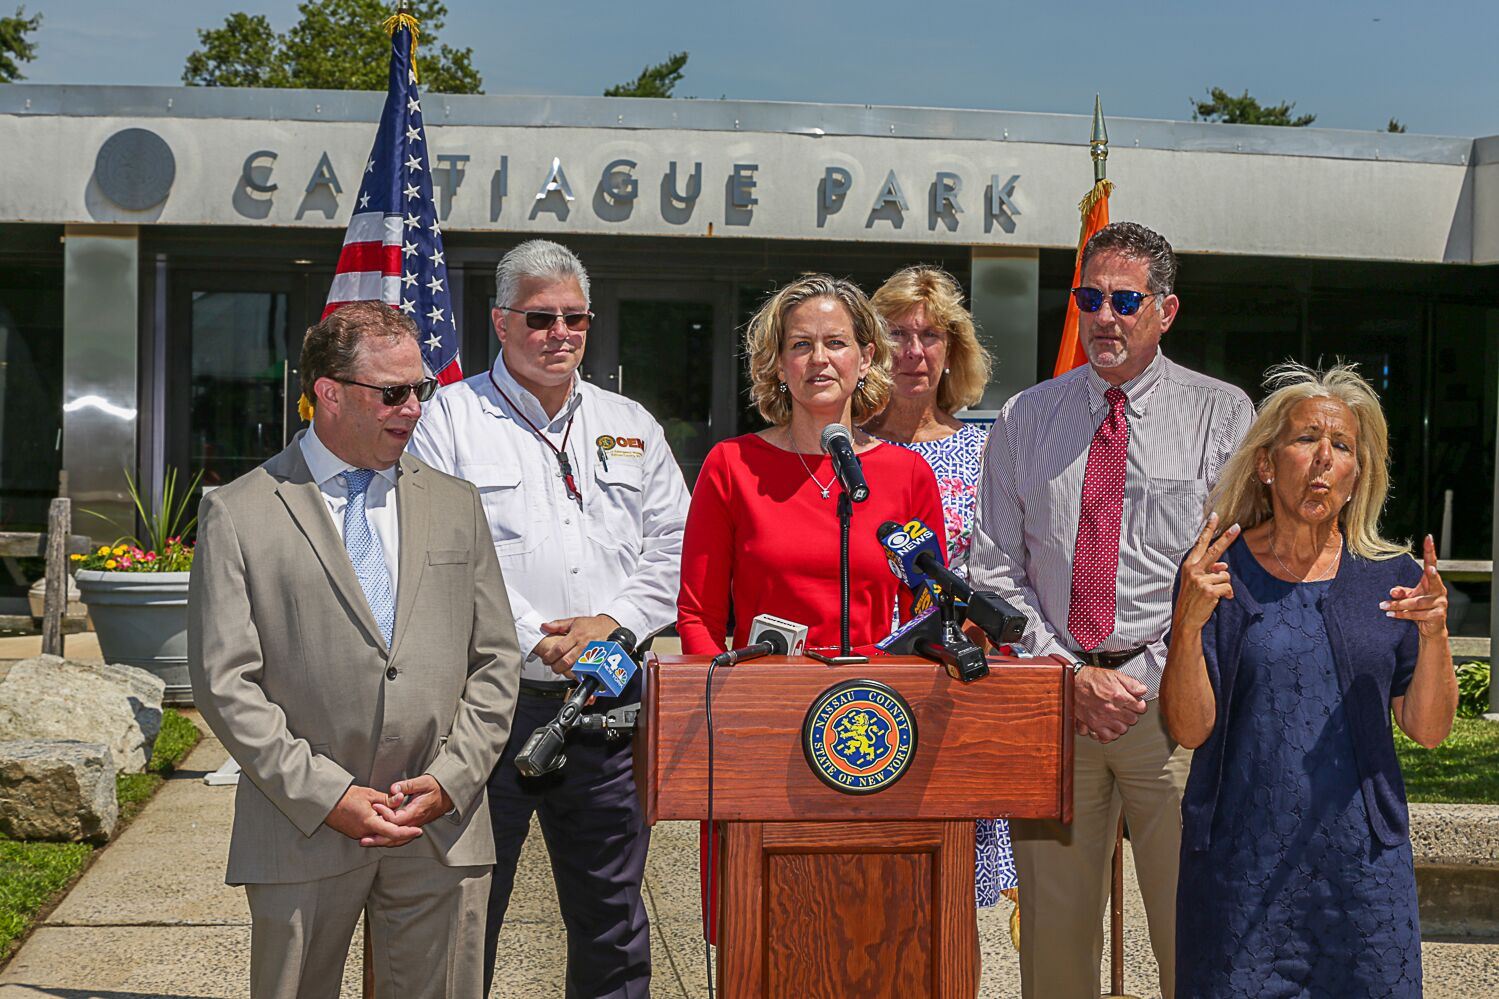 County Executive Curran & County Officials Warn Residents of Expected High Temperatures